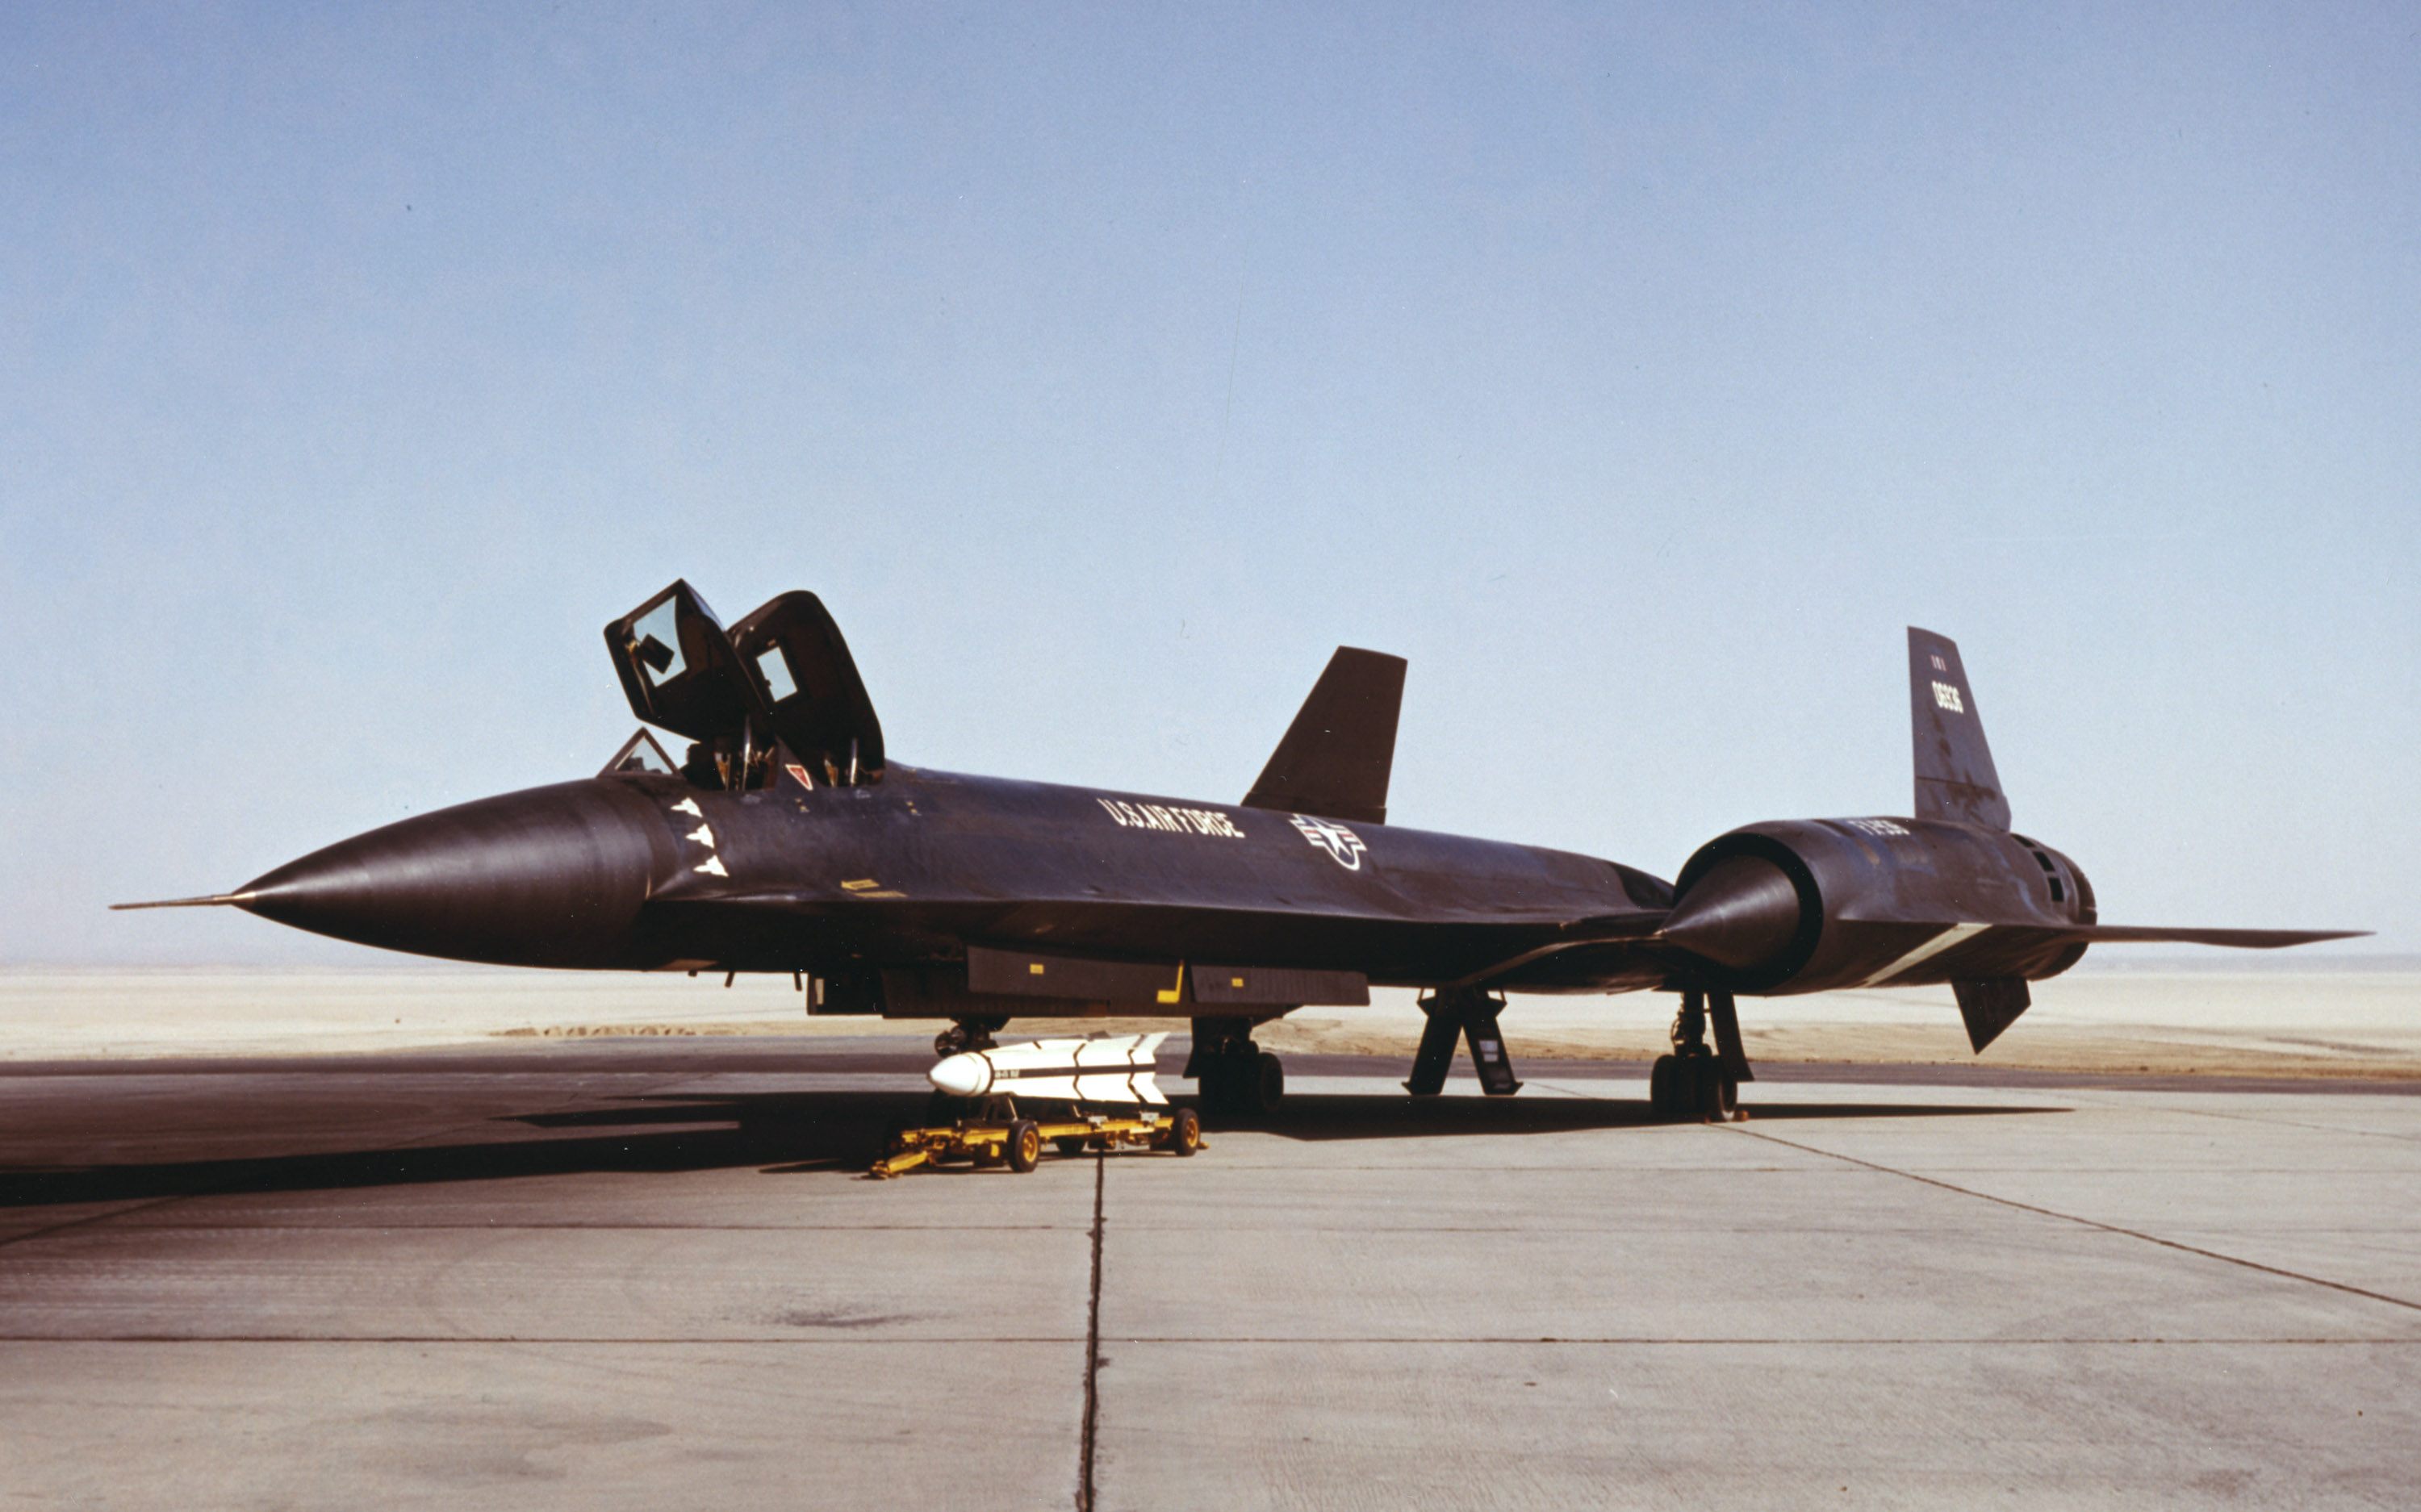 A Hughes AIM-47 missile sits next to the third Lockheed YF-12A Blackbird at Edwards AFB. The white silhouettes on the forward fuselage denote the speed and altitude records set in May 1965. (AFTC/HO photo)